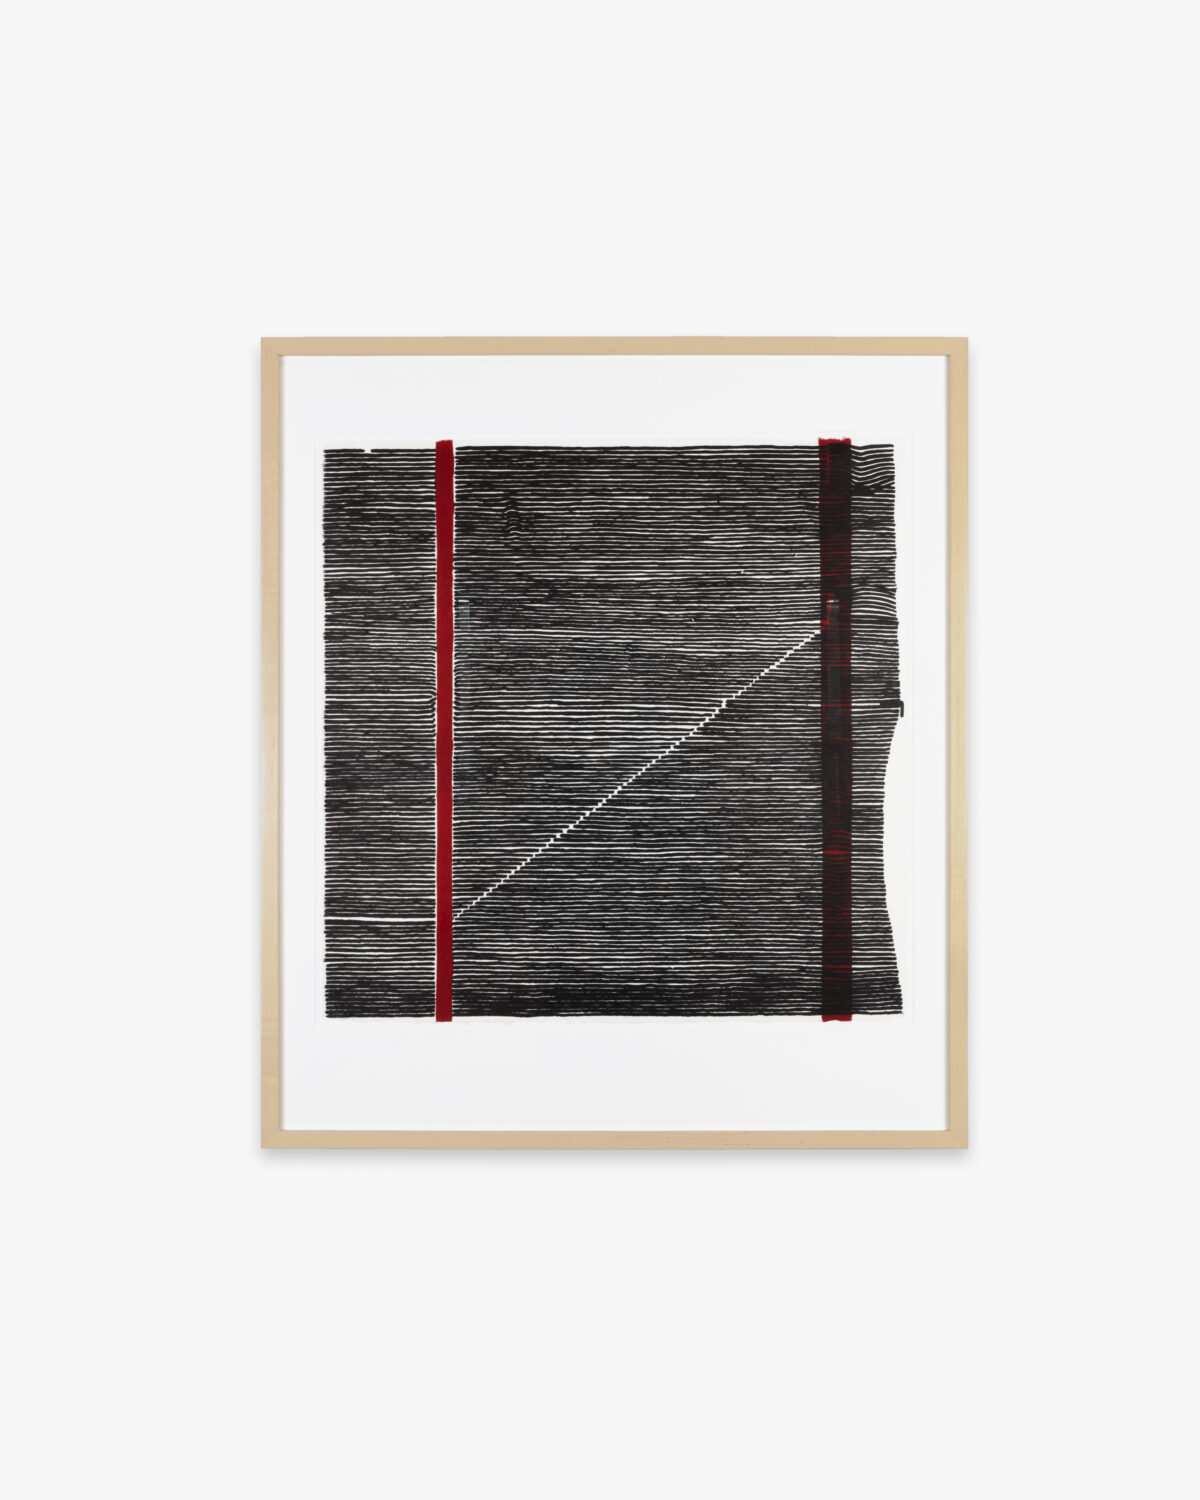 Grey rectangle with red and black vertical lines.